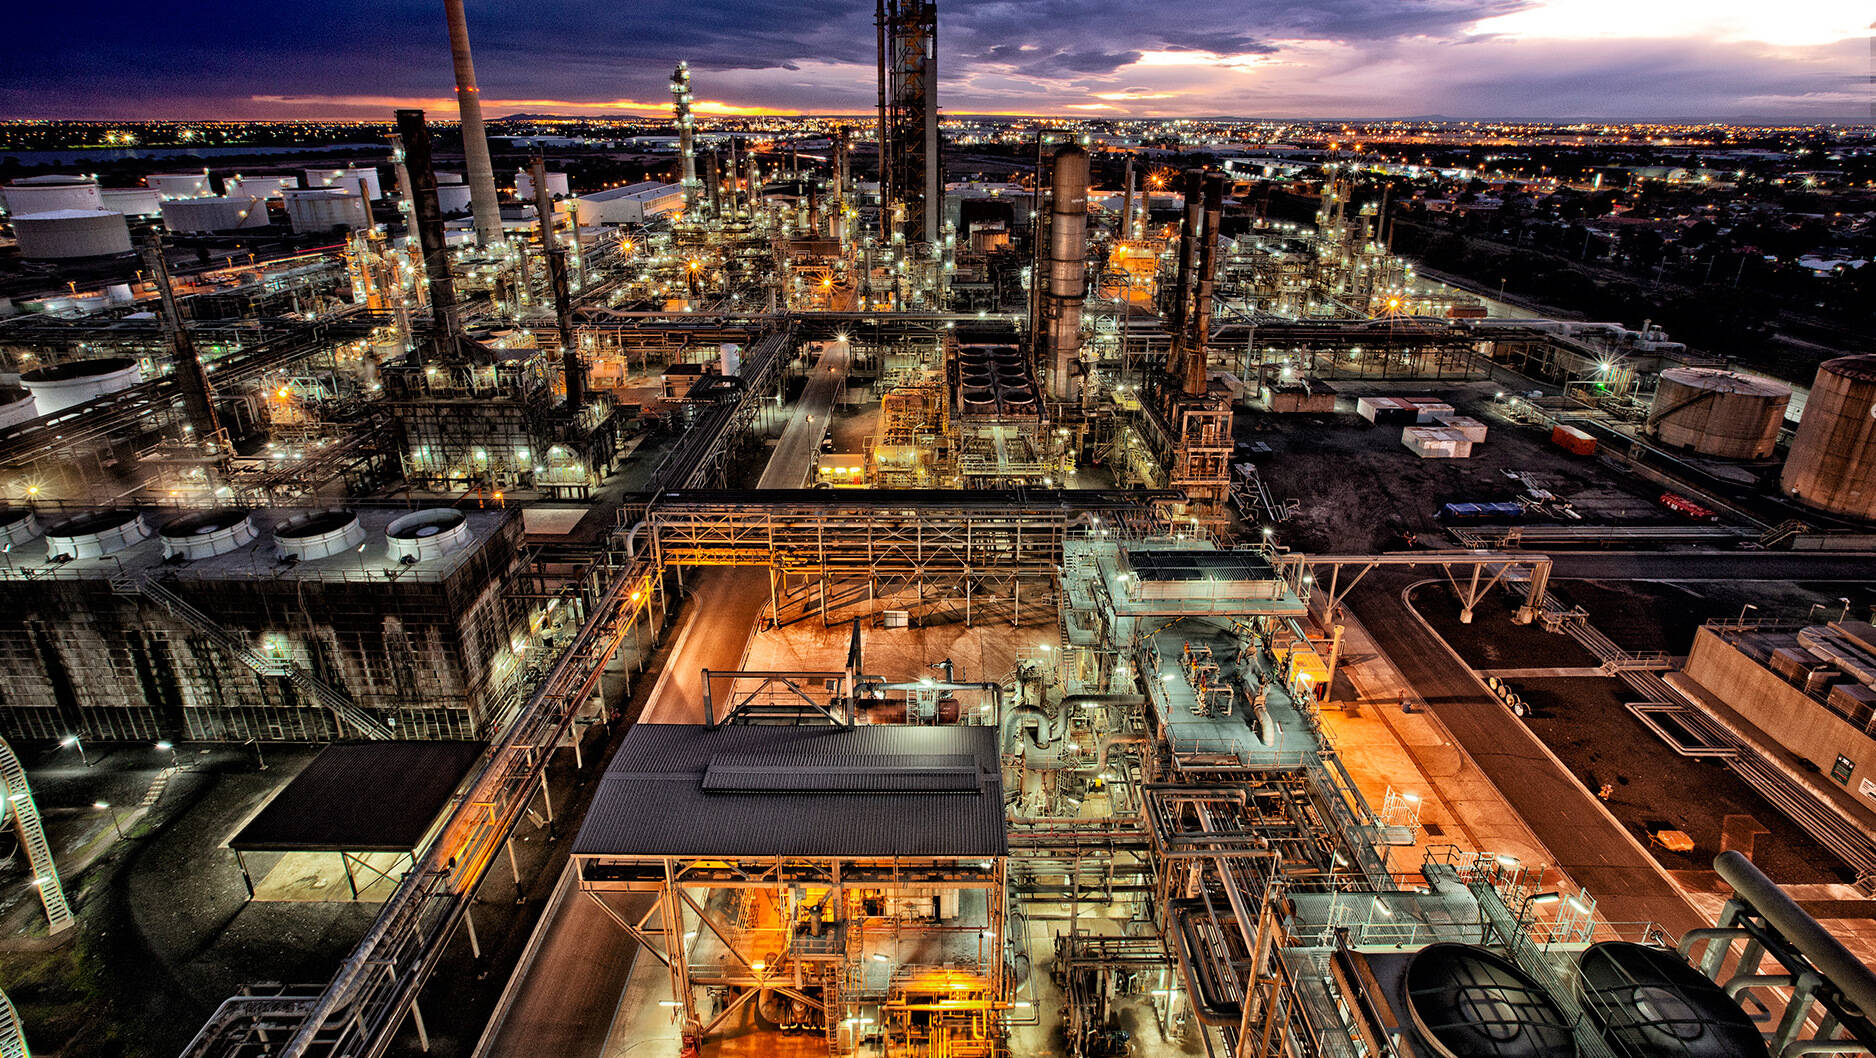 Image Photo — Mobil's Altona Refinery continues to defy Australia’s increasingly challenging environment for manufacturing, boosting state and local economies.